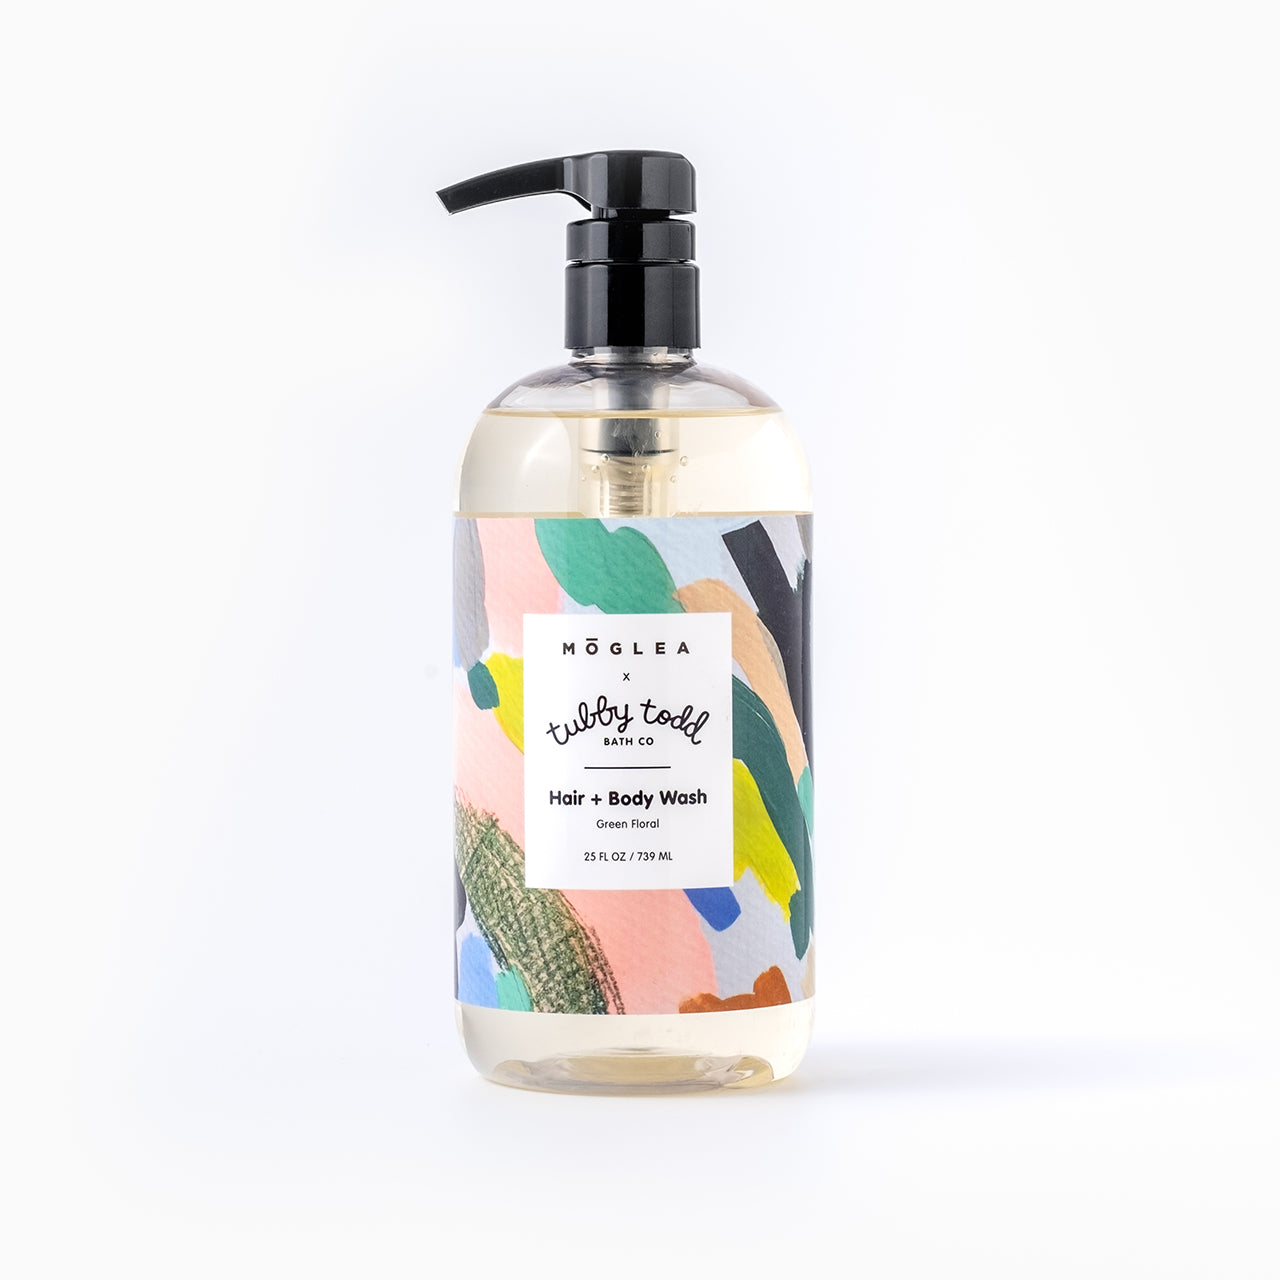 25oz Green Floral Hair + Body wash against white background